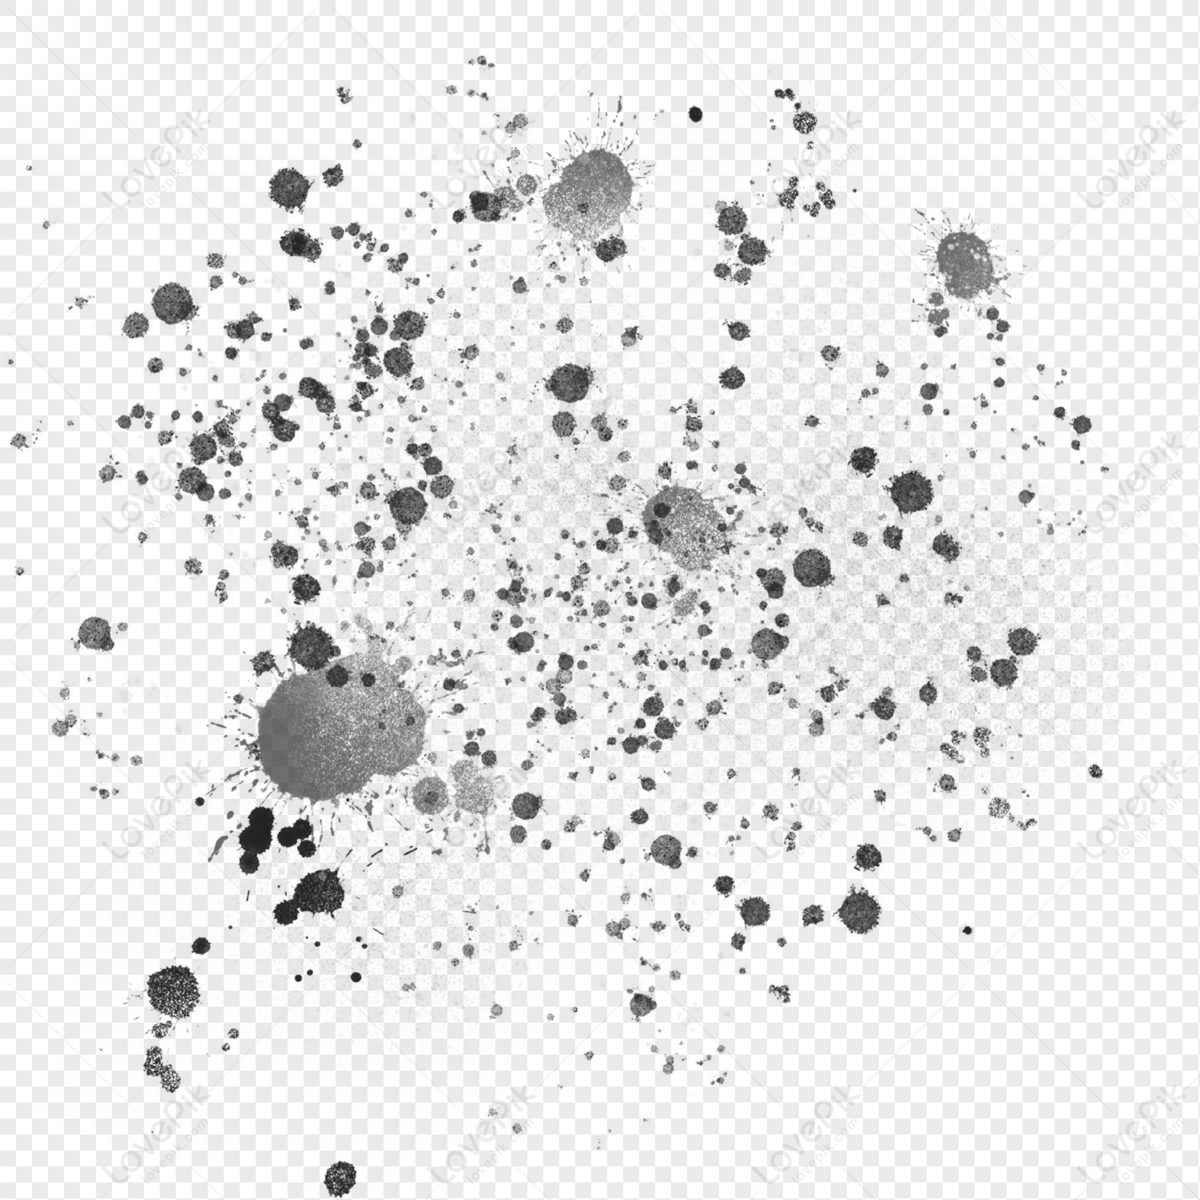 Splash Material, Material, Shading, Stains PNG White Transparent And ...